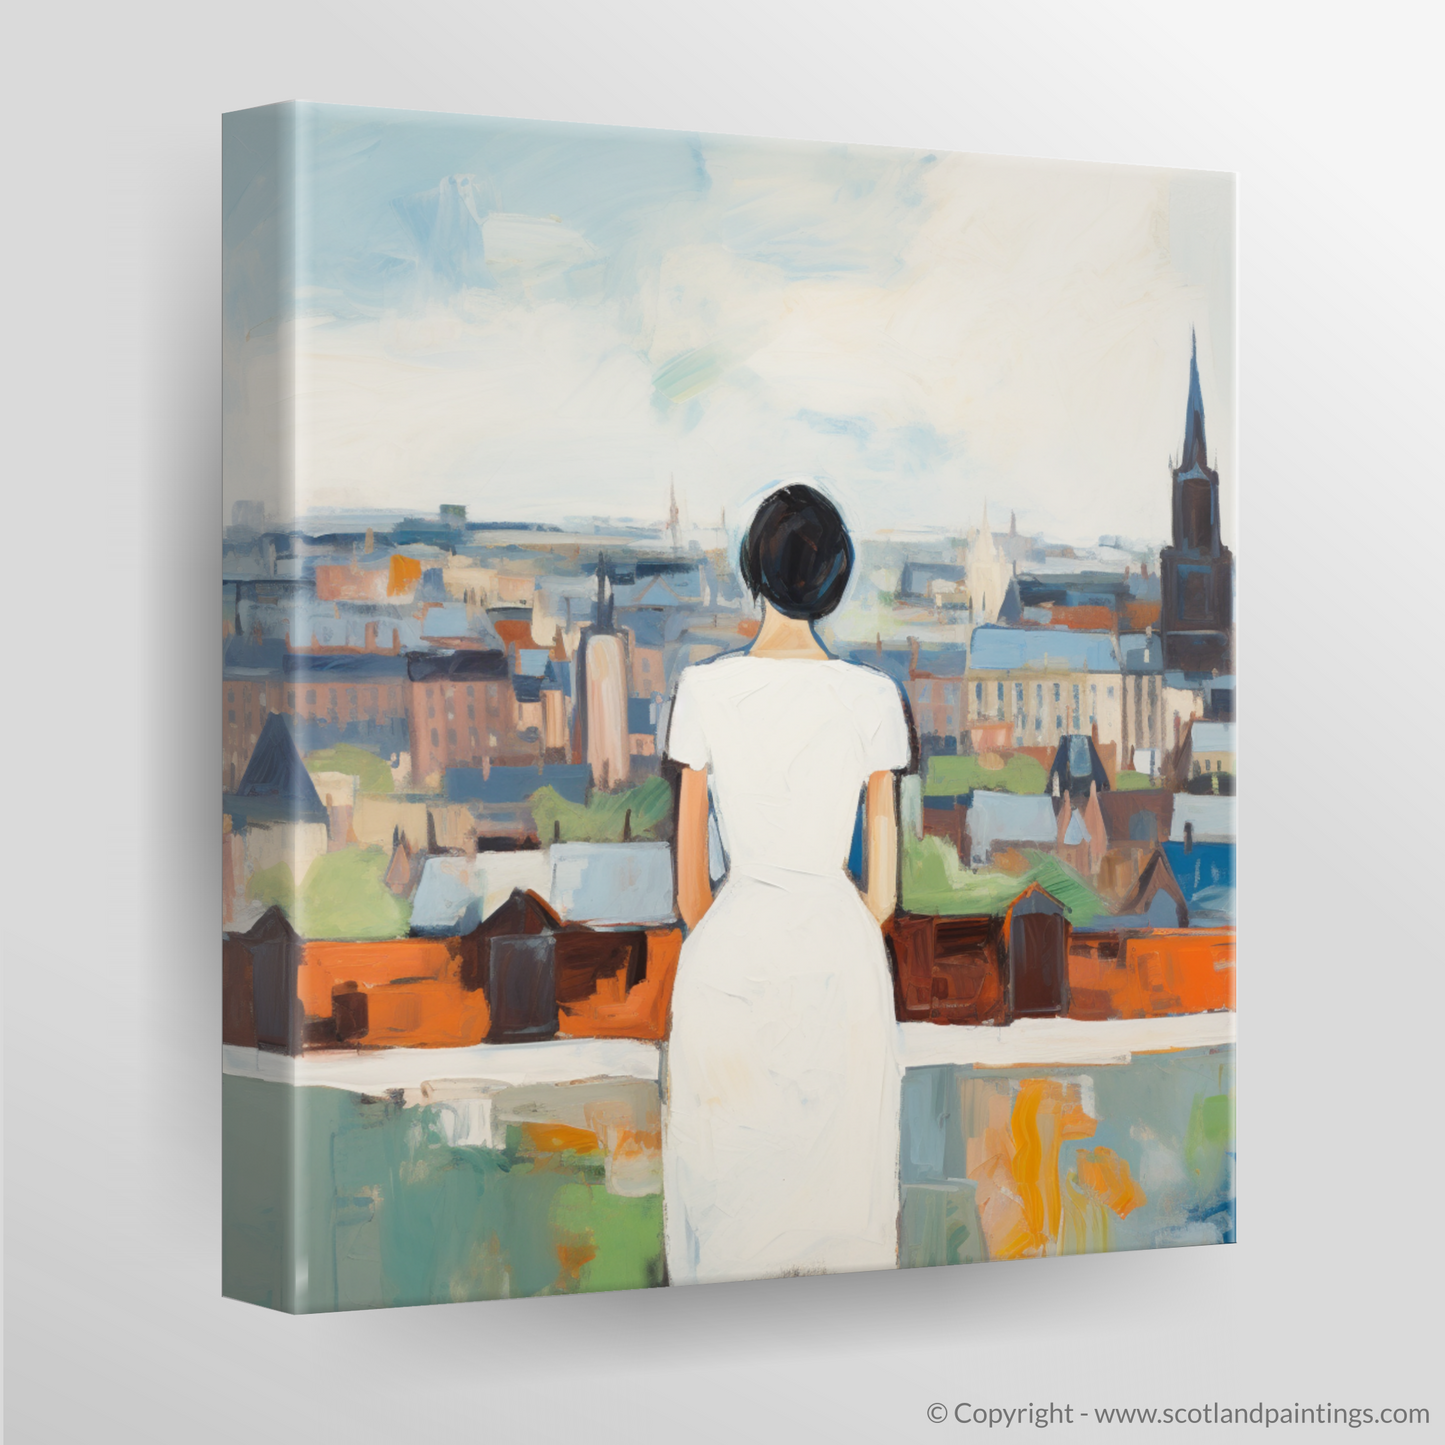 Serenity and the City: A Glasgow Muse